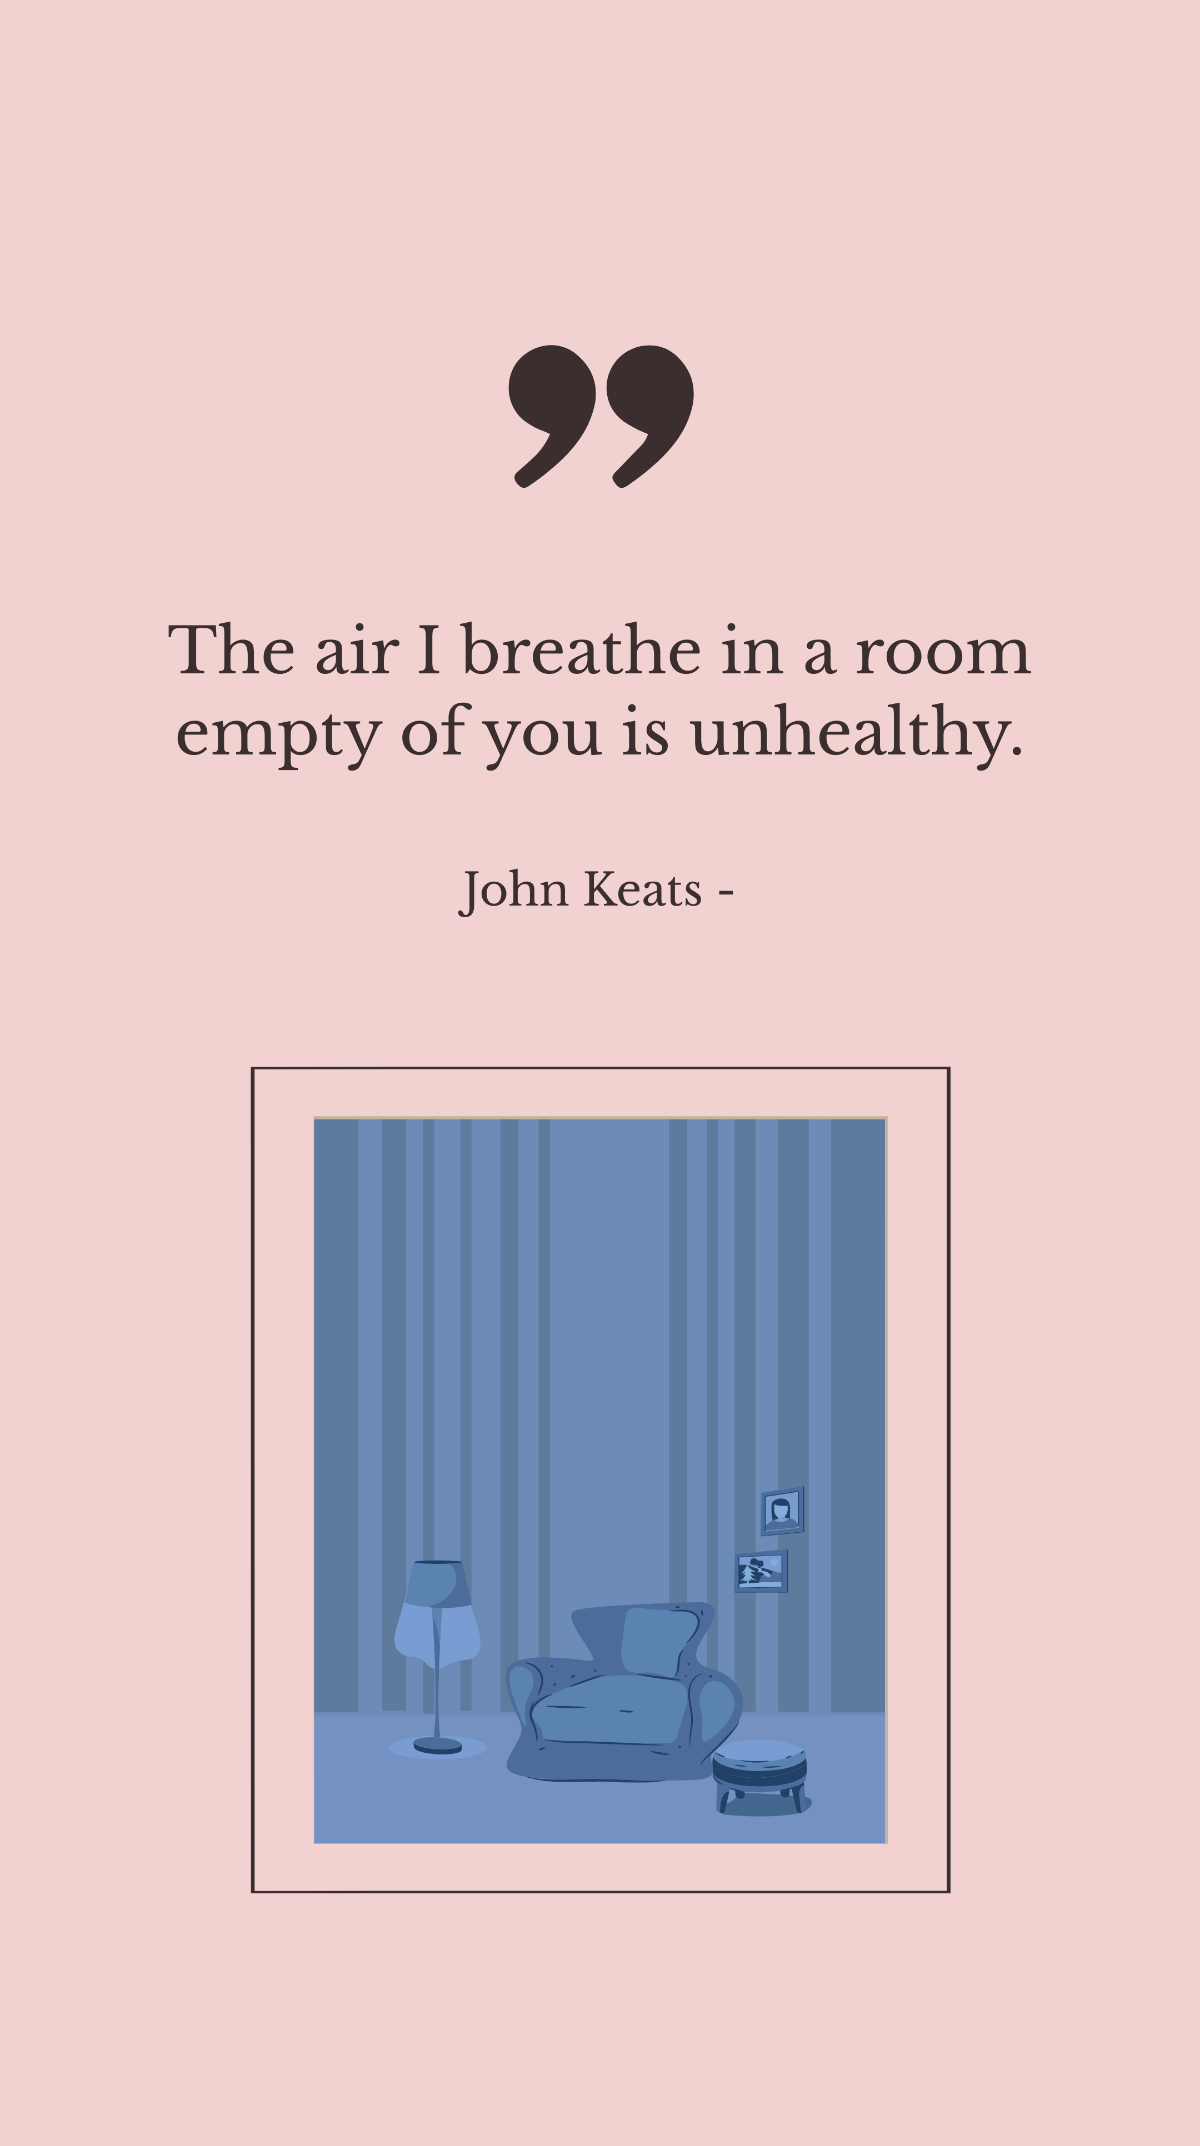 John Keats - The air I breathe in a room empty of you is unhealthy. Template